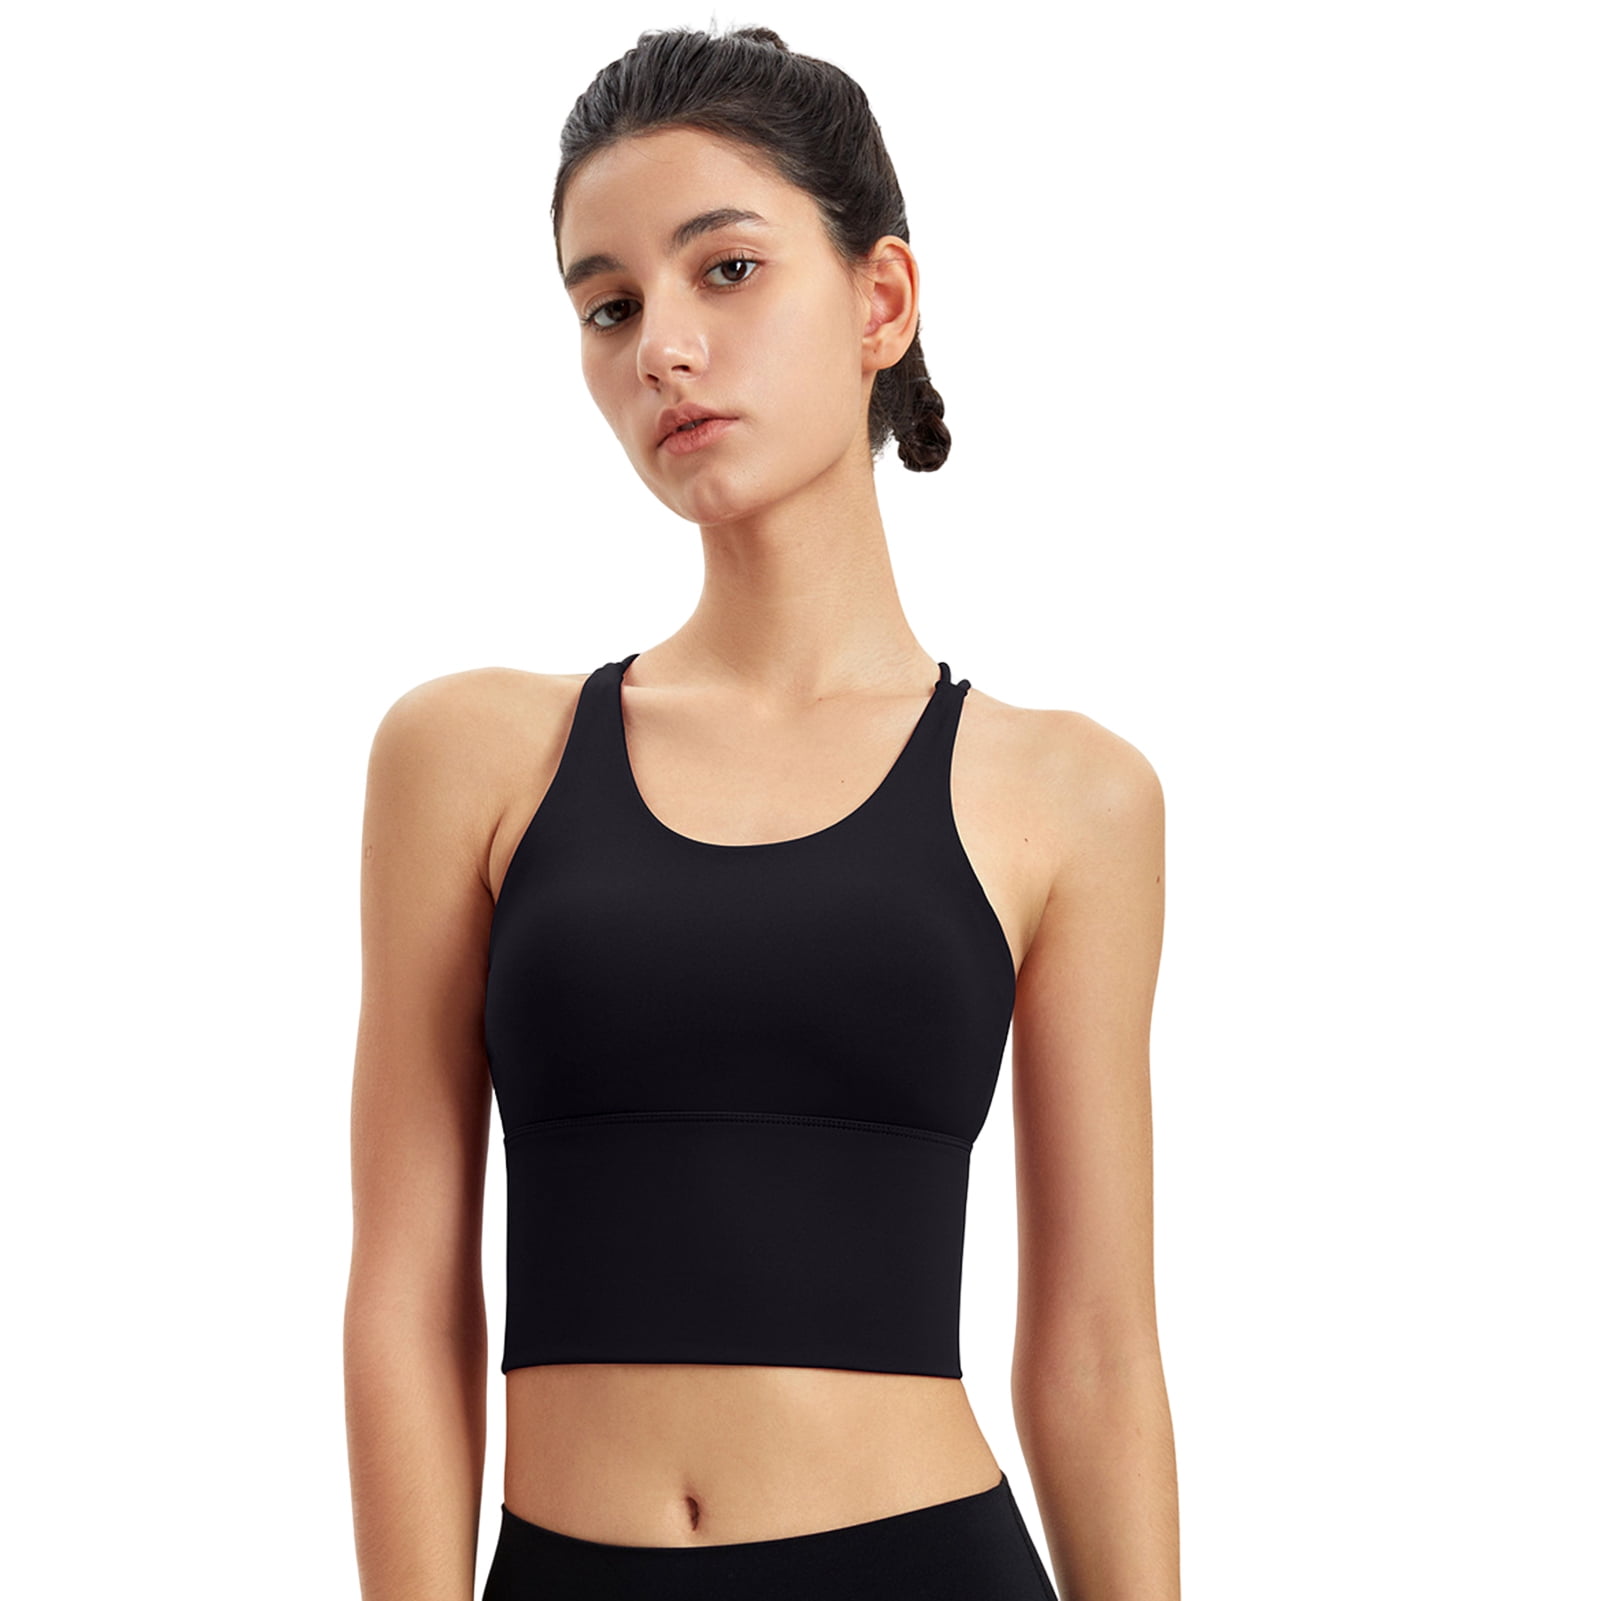 Sexy V Neck Prima Donna Sports Bra For Women And Teen Girls Contrast Color Spaghetti  Strap, Push Up Padded, Wirefree, Ideal For Running, Yoga And Underwear From  Douqidl, $27.72